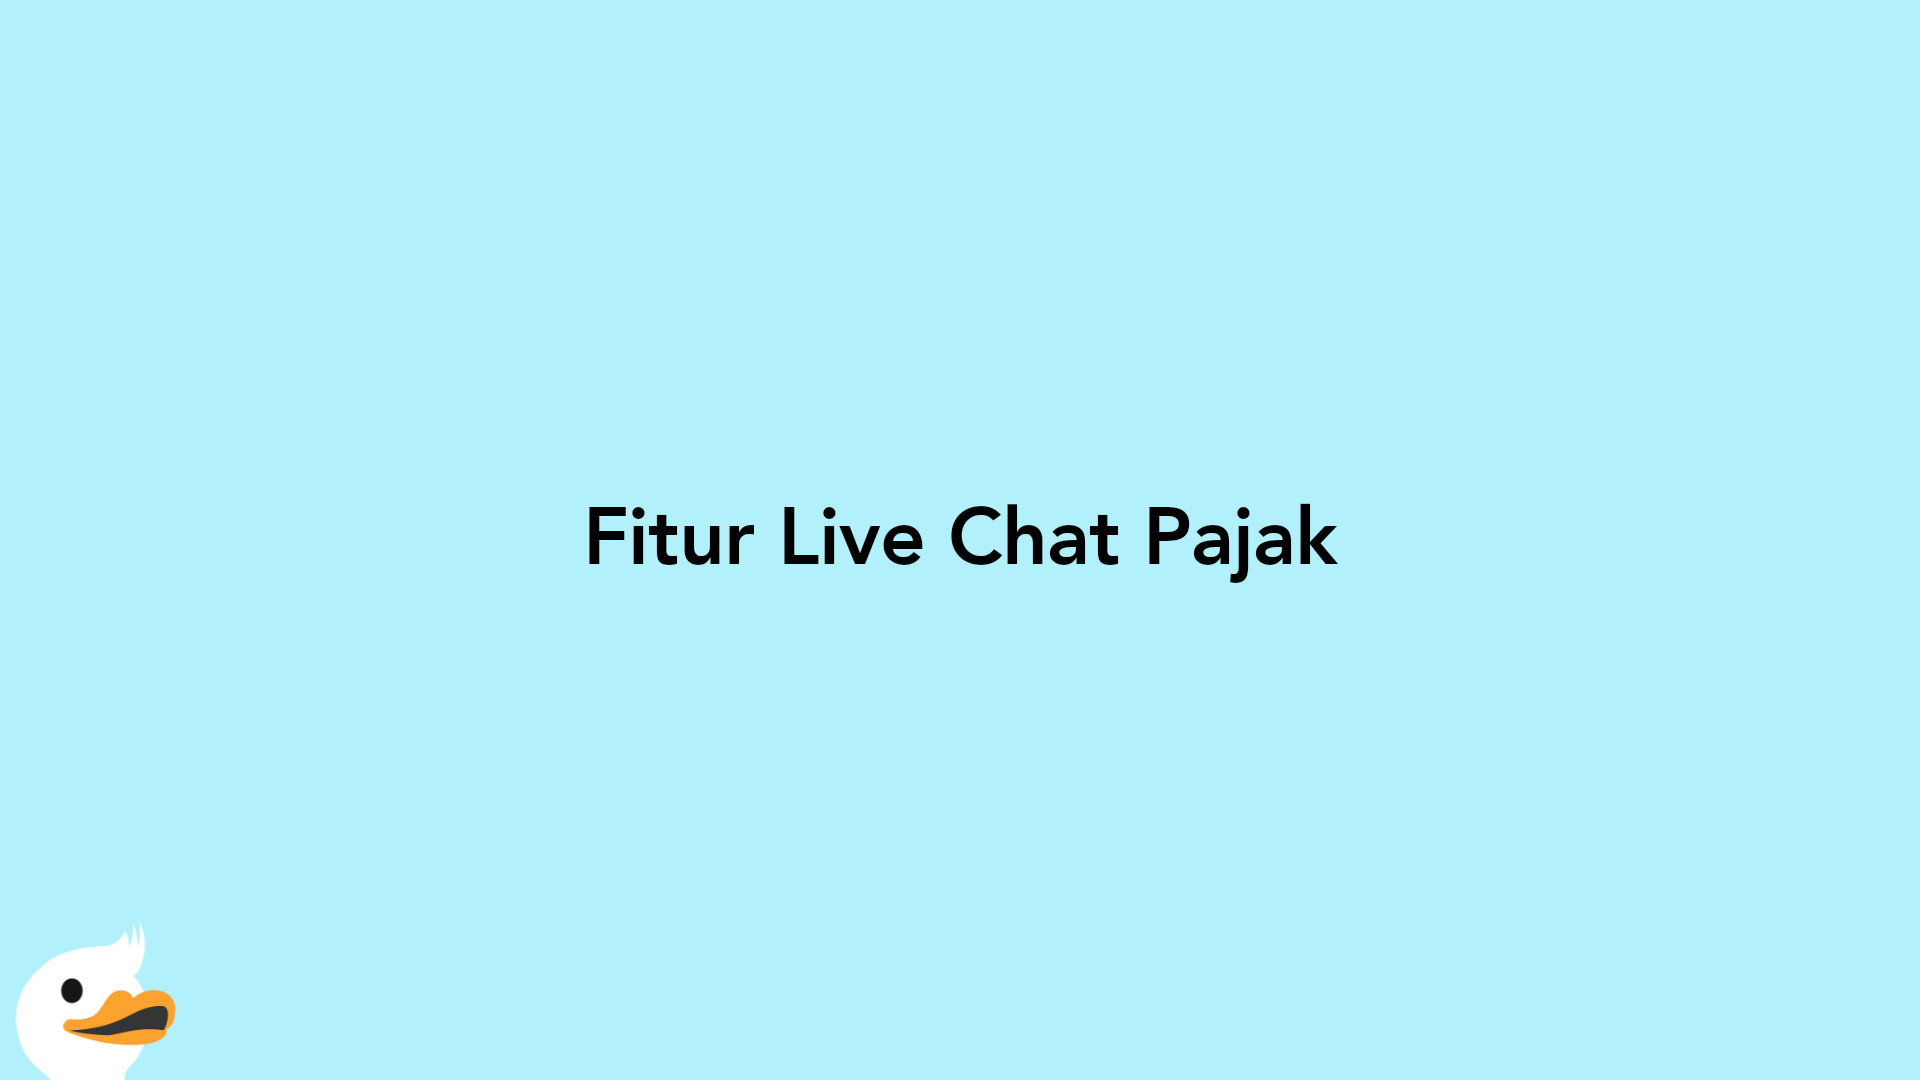 Fitur Live Chat Pajak